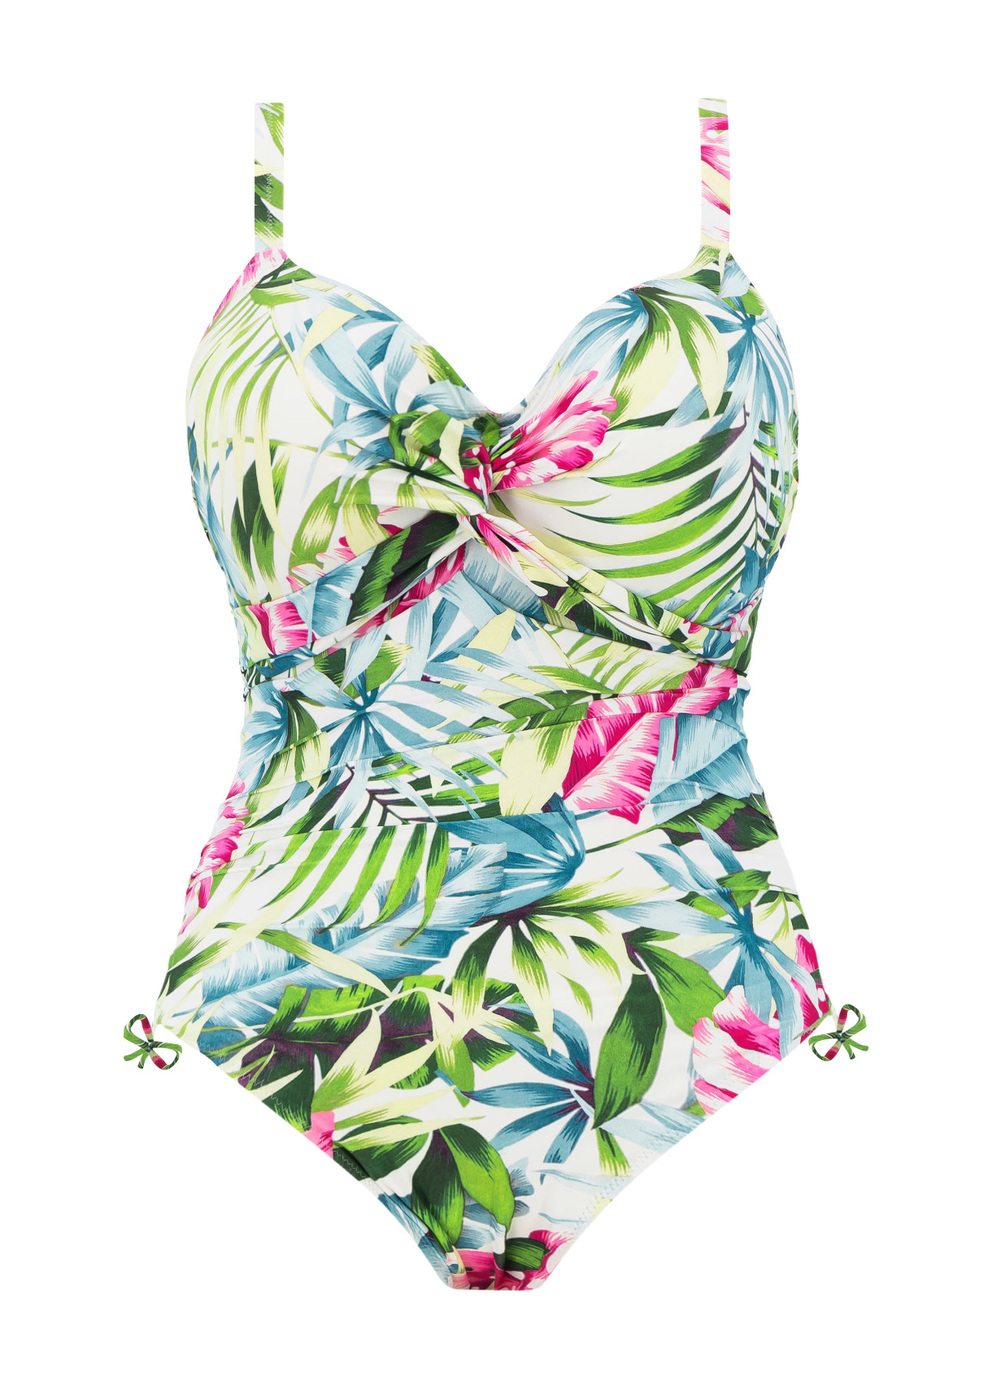 Langkawi White Twist Front Swimsuit from Fantasie